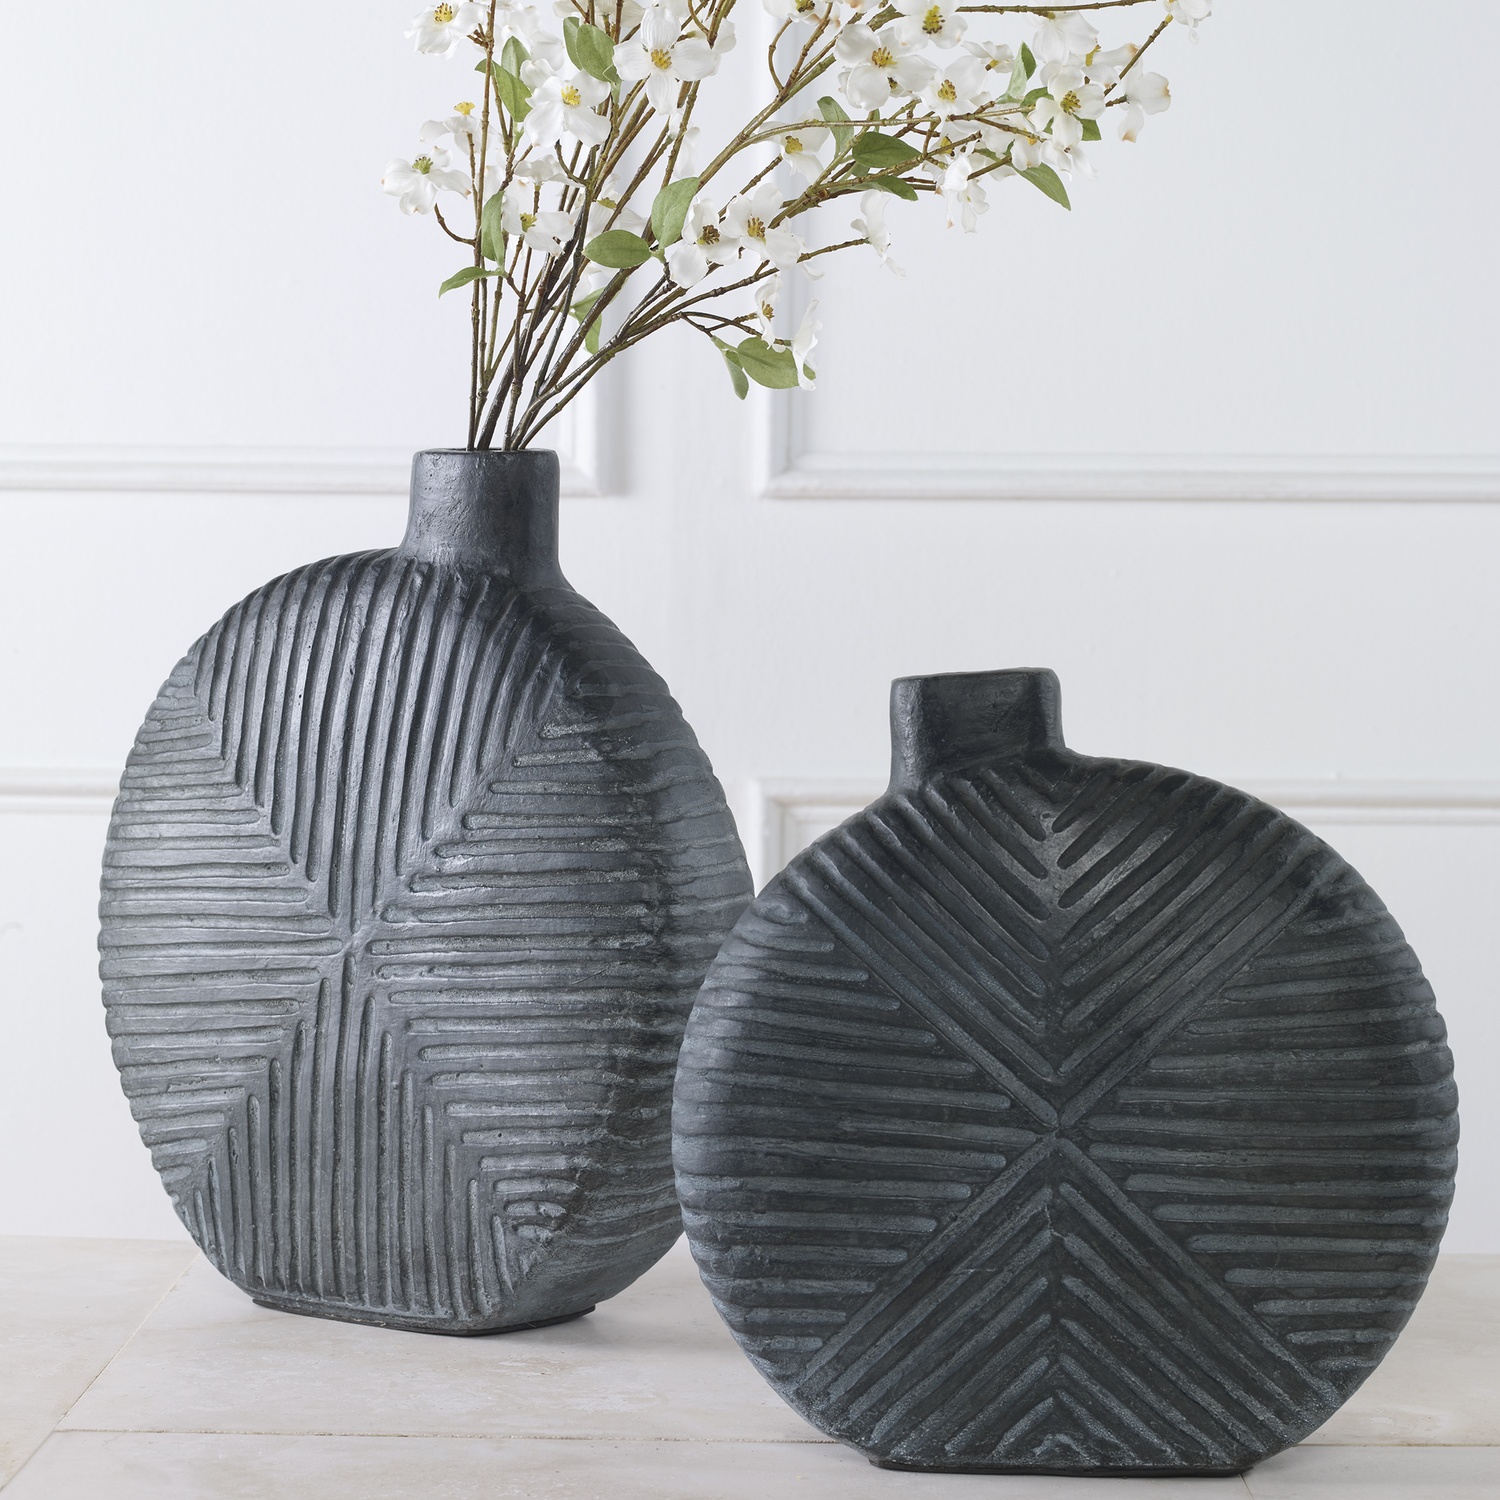 Viewpoint-Vases Urns & Finials